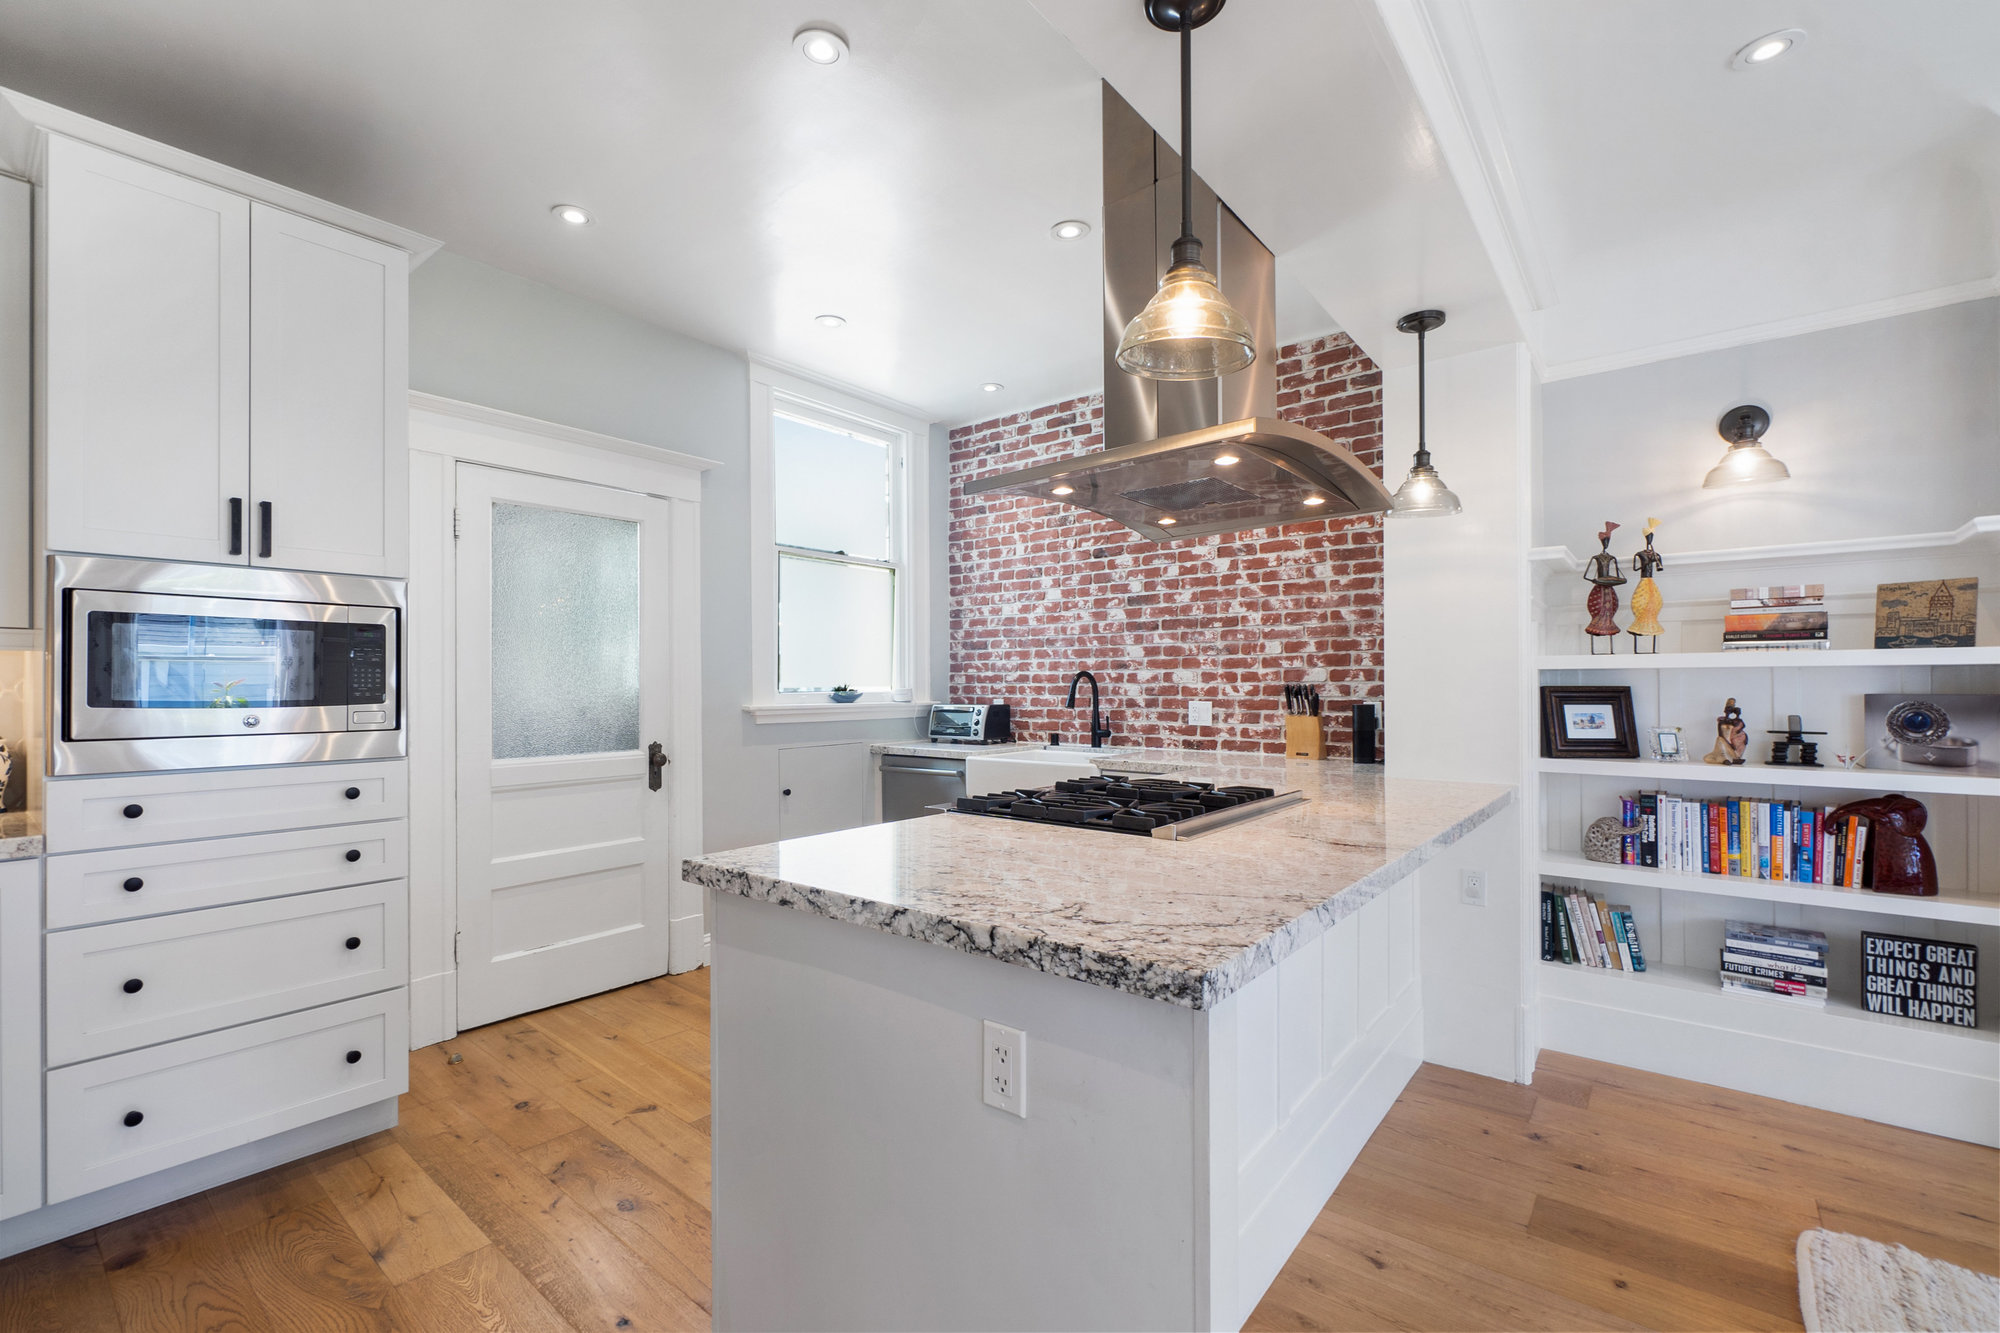 Property Photo: Kitchen with wood floors, white cabinets, and recess and pendant lighting